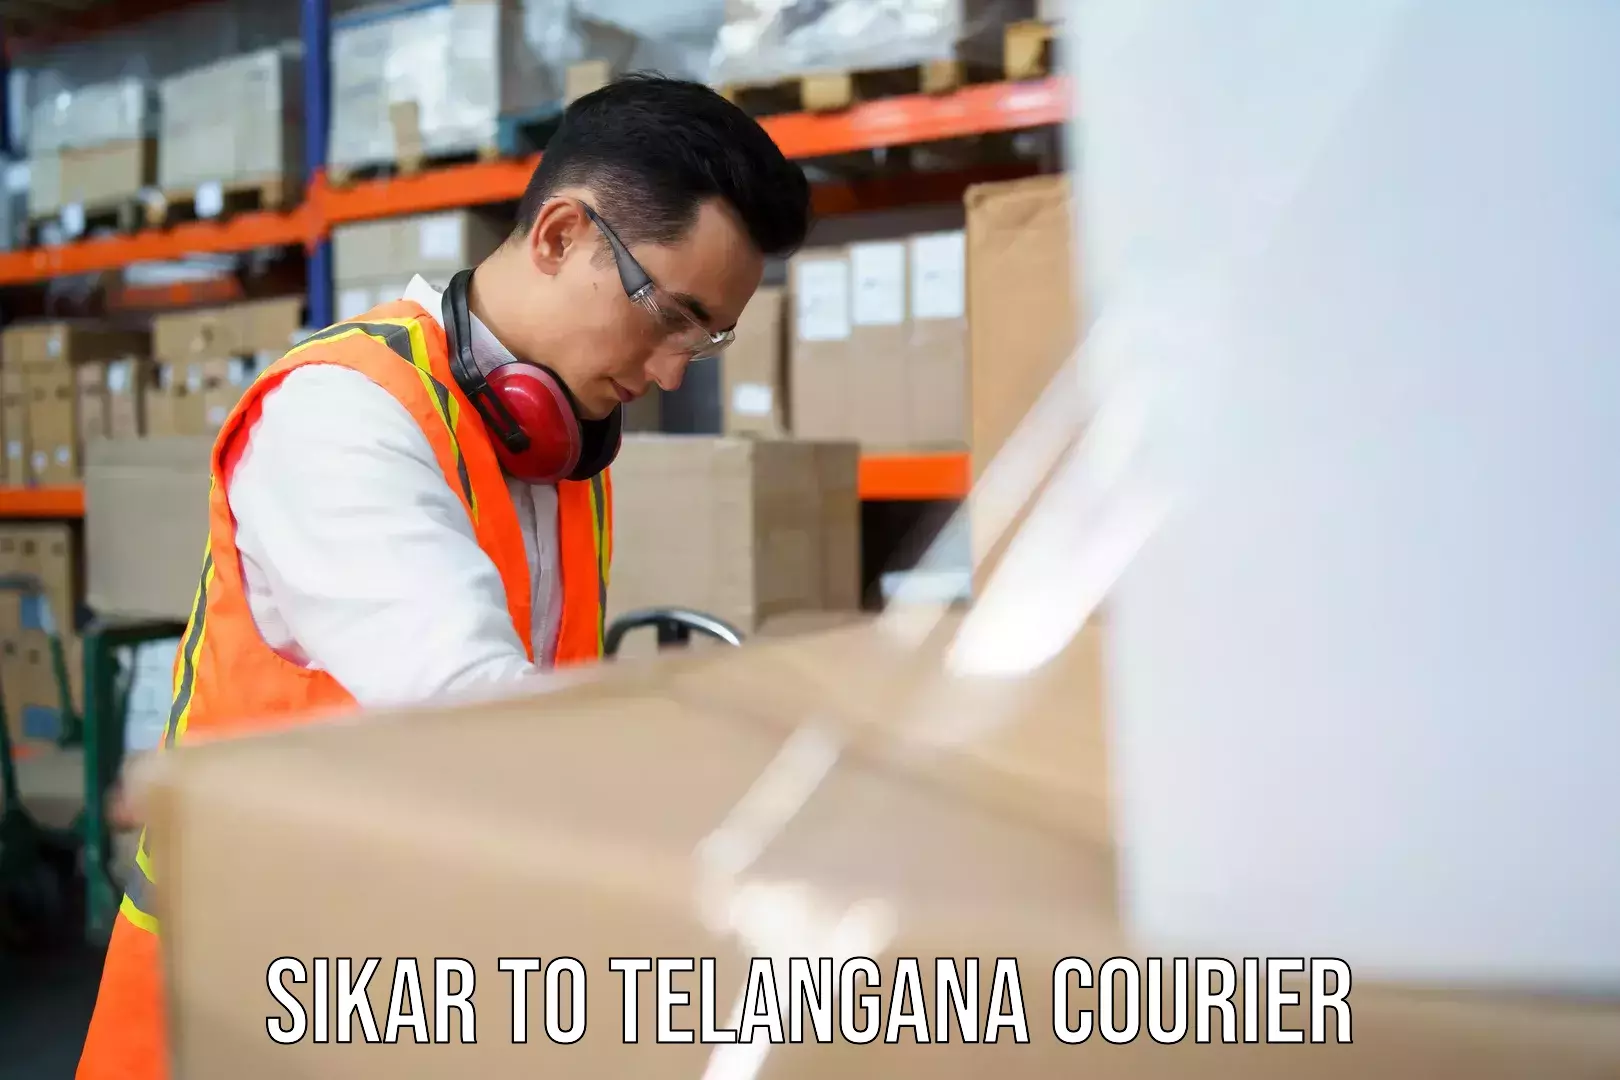 Fast-track shipping solutions Sikar to Hyderabad